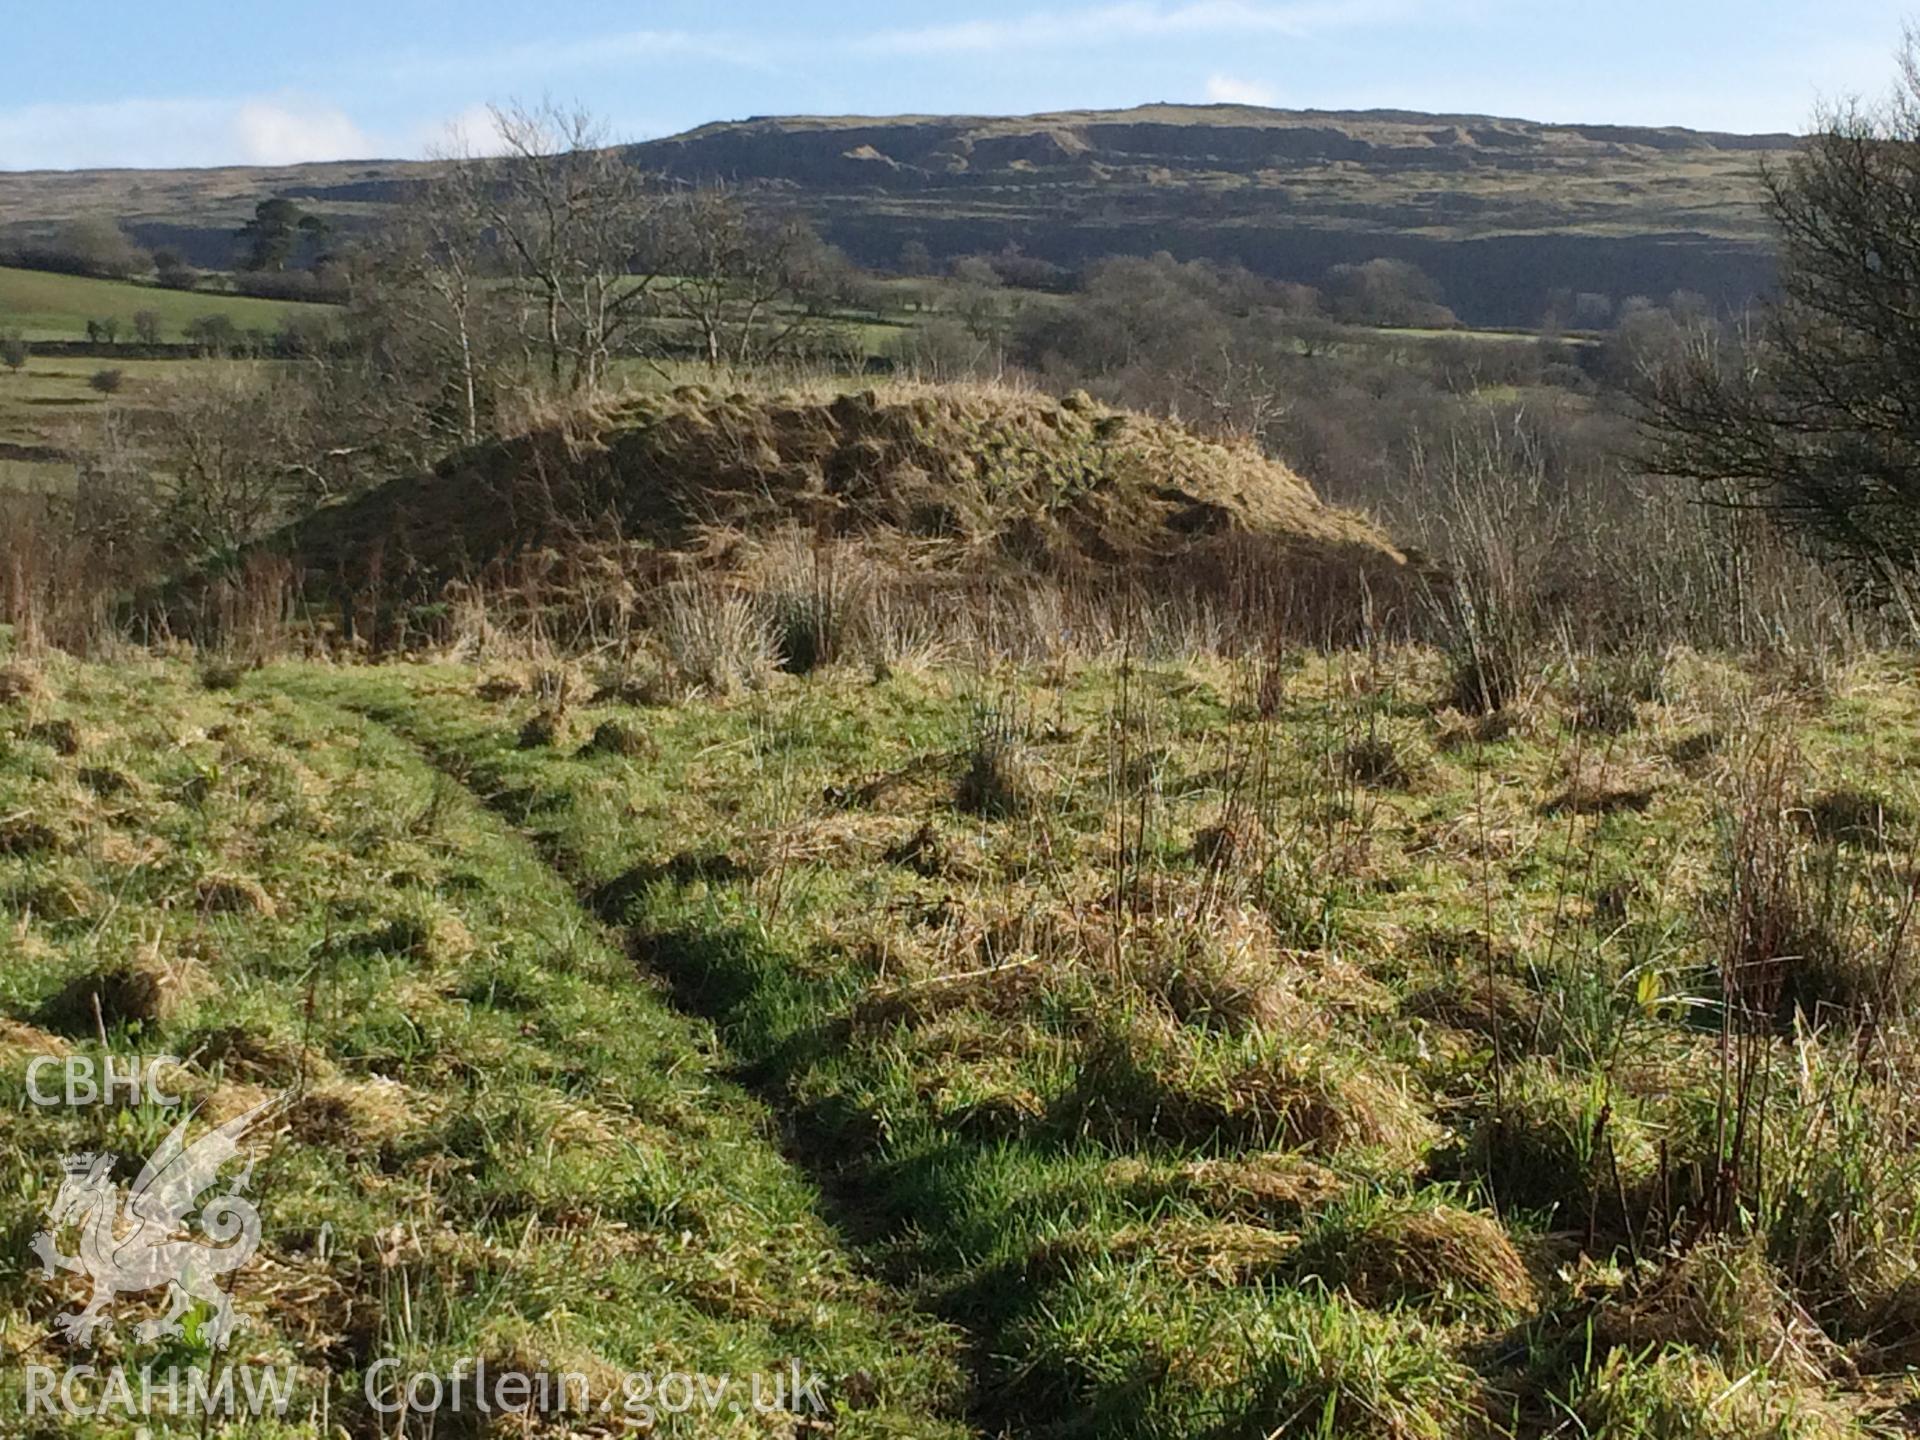 Colour photo showing mound at Cae Burdydd, produced by  Paul R. Davis,  4th February 2017.